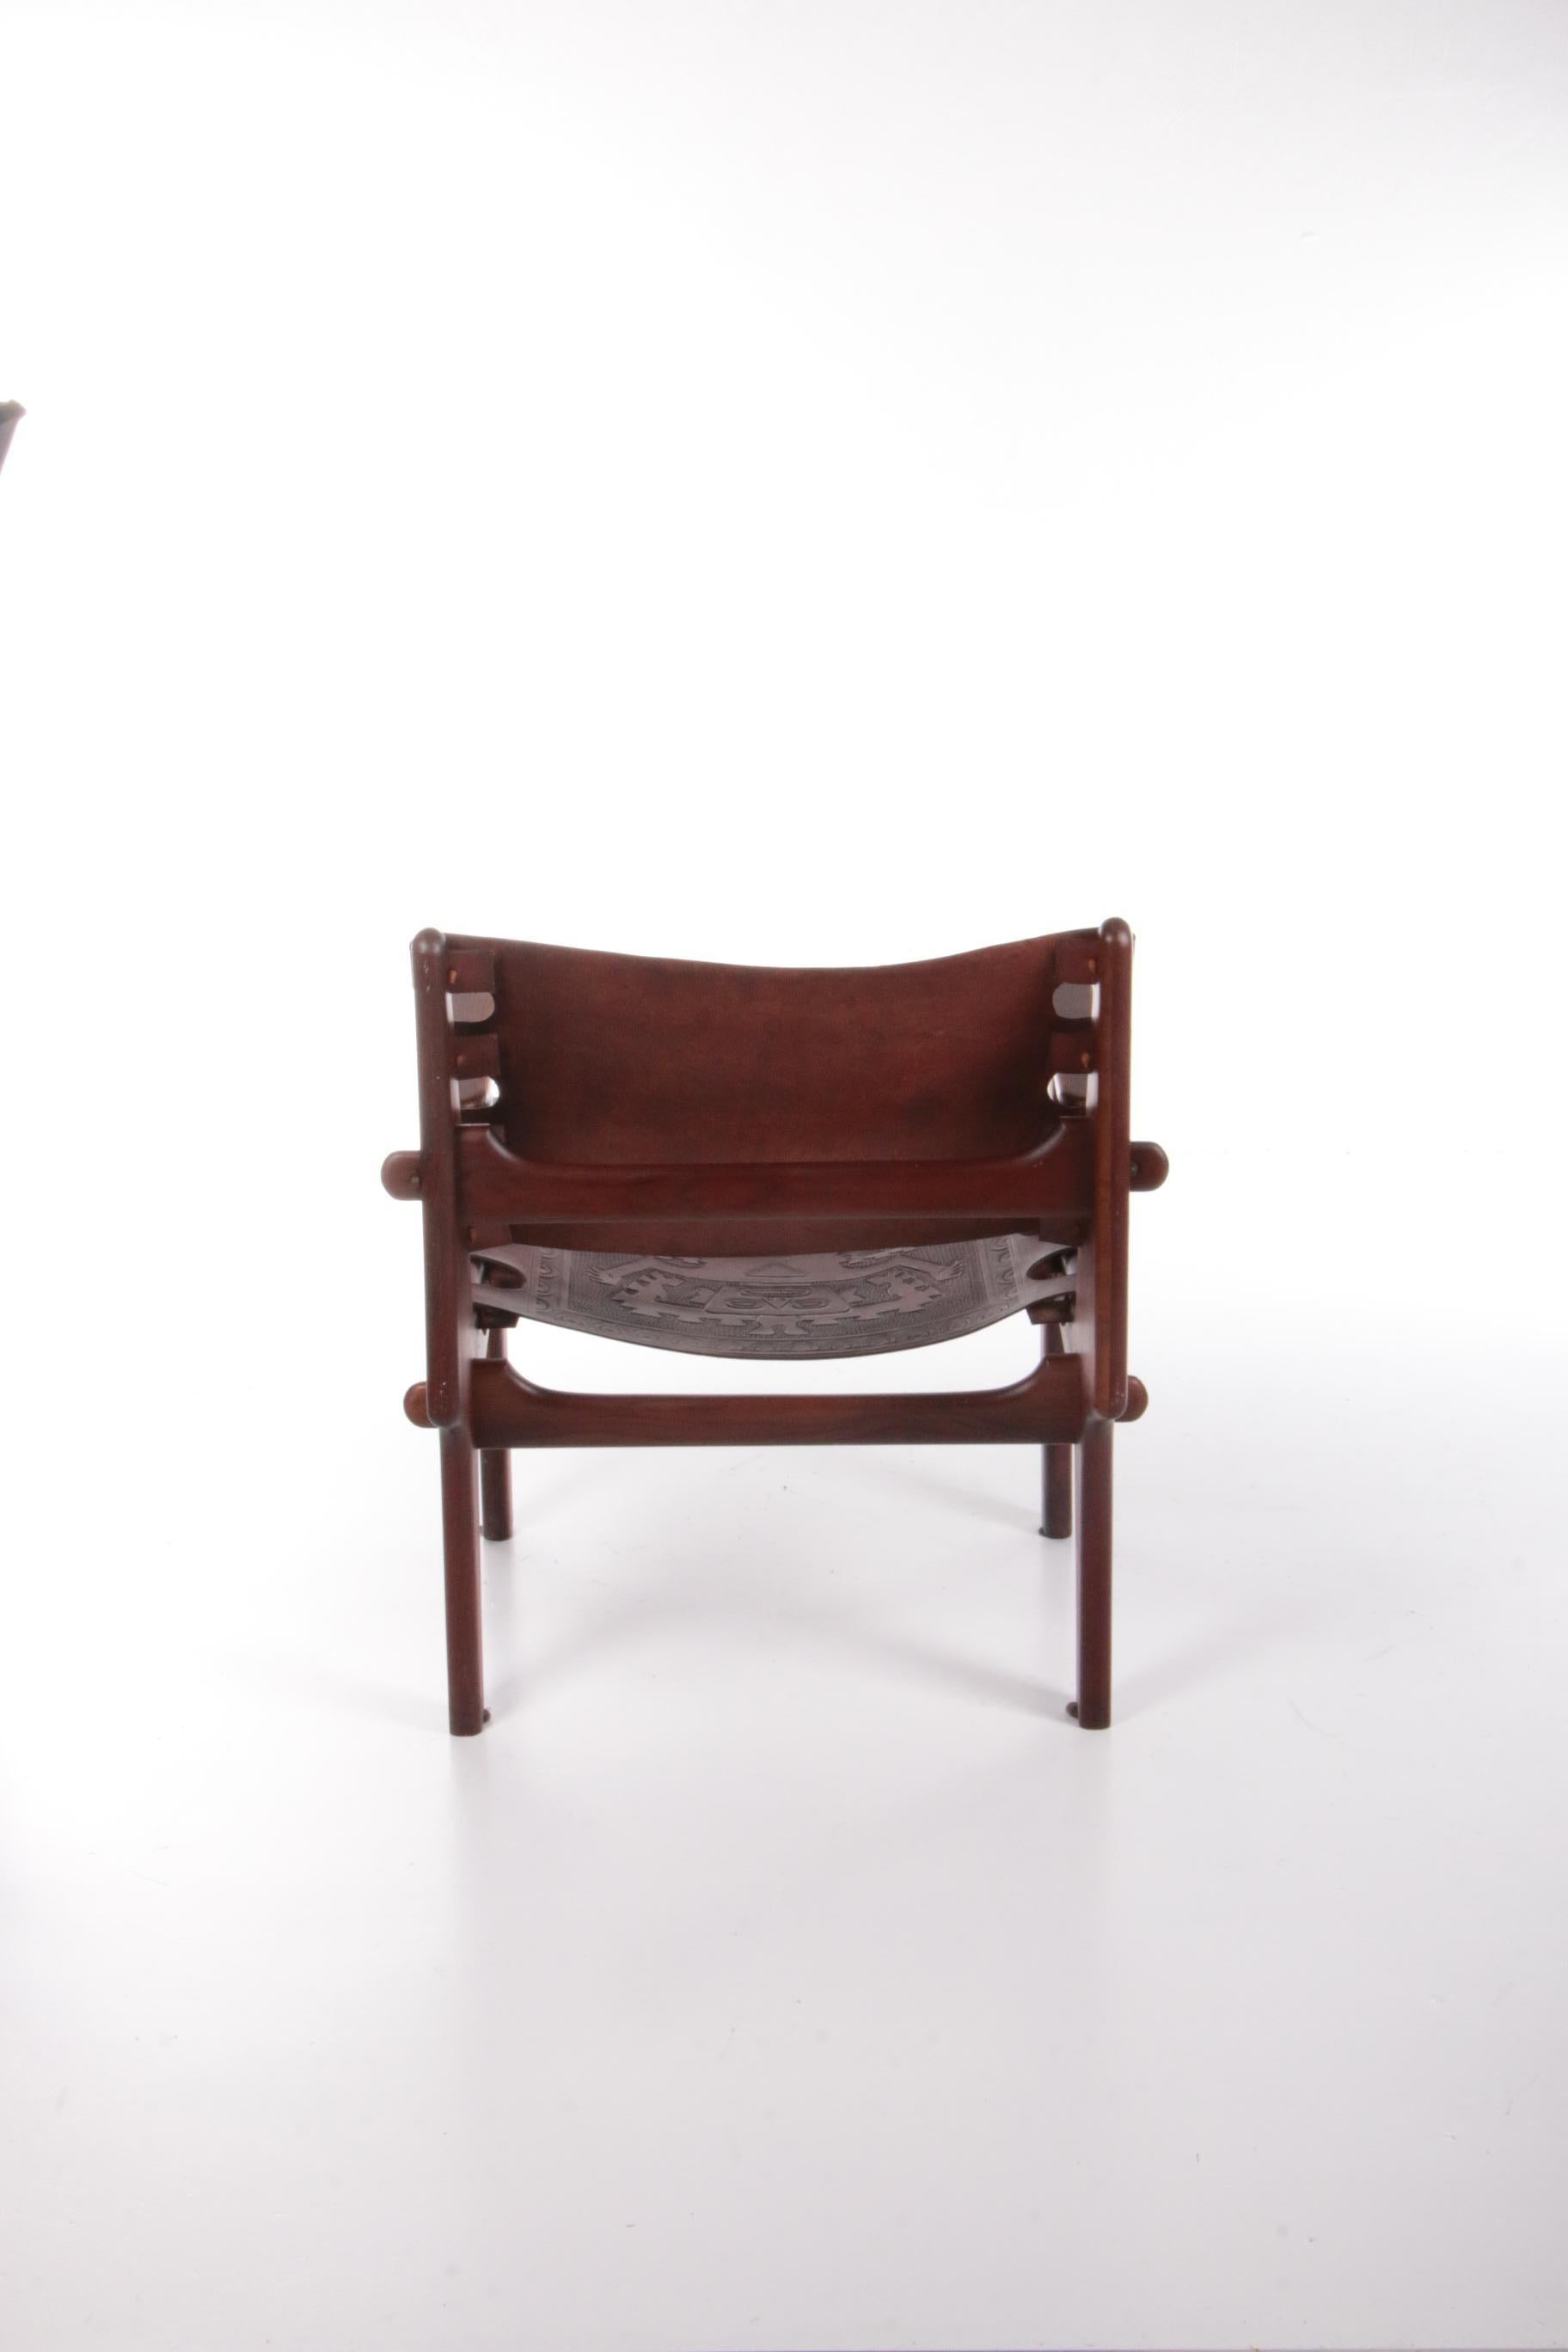 Mid-20th Century Lounge Chair by Angel I. Pazmino for Muebles de Estilo, 1960s For Sale